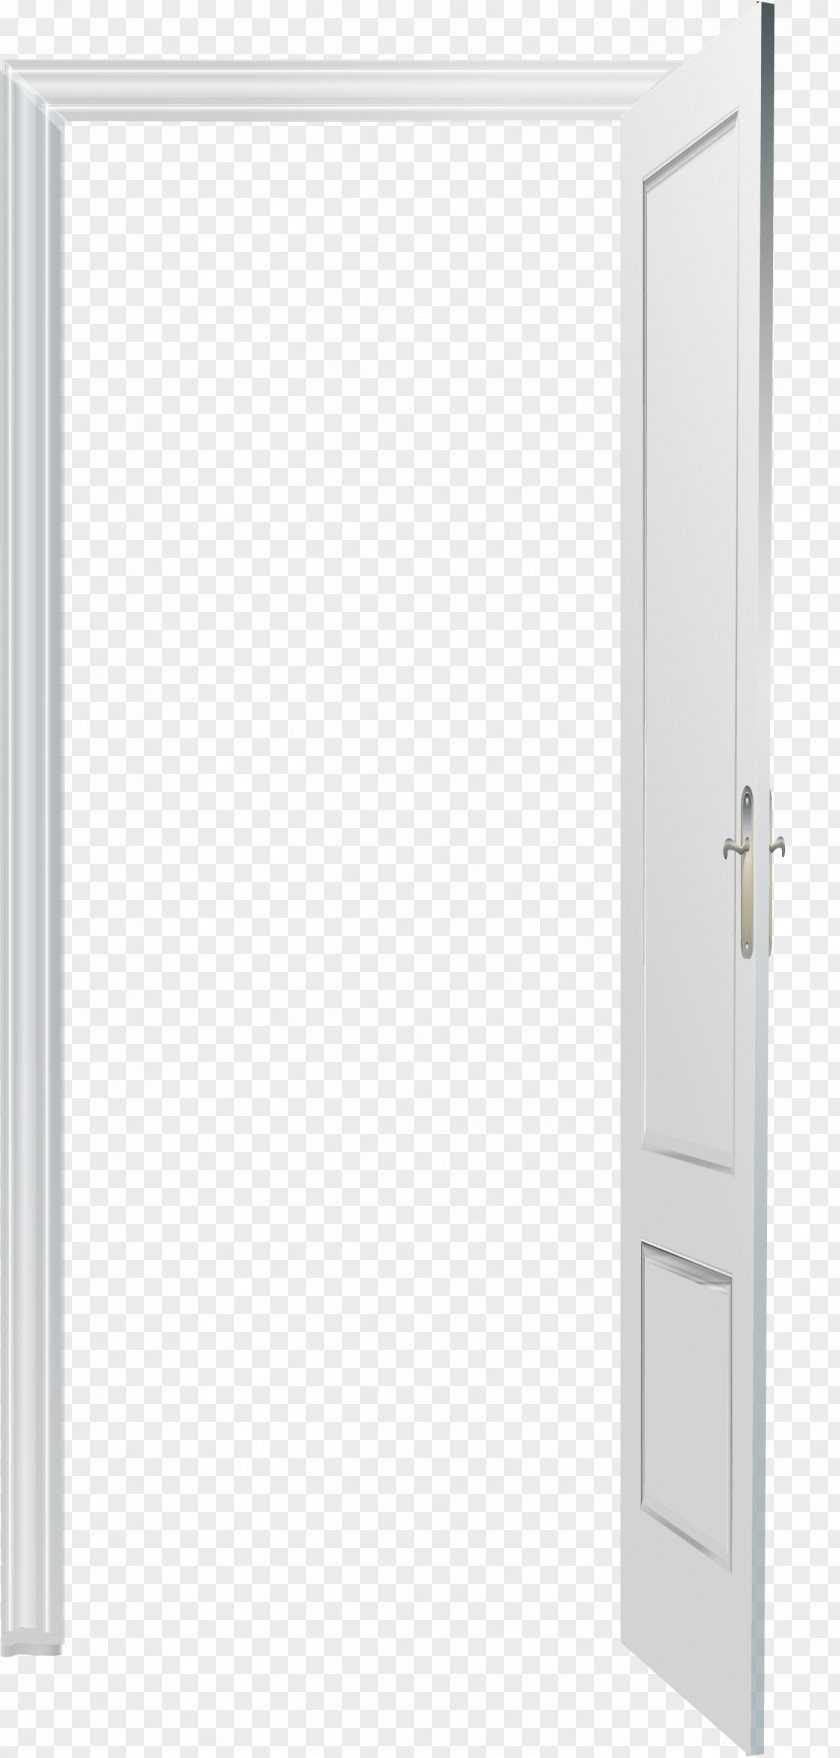 Creative Open Door Material House Angle Shower PNG